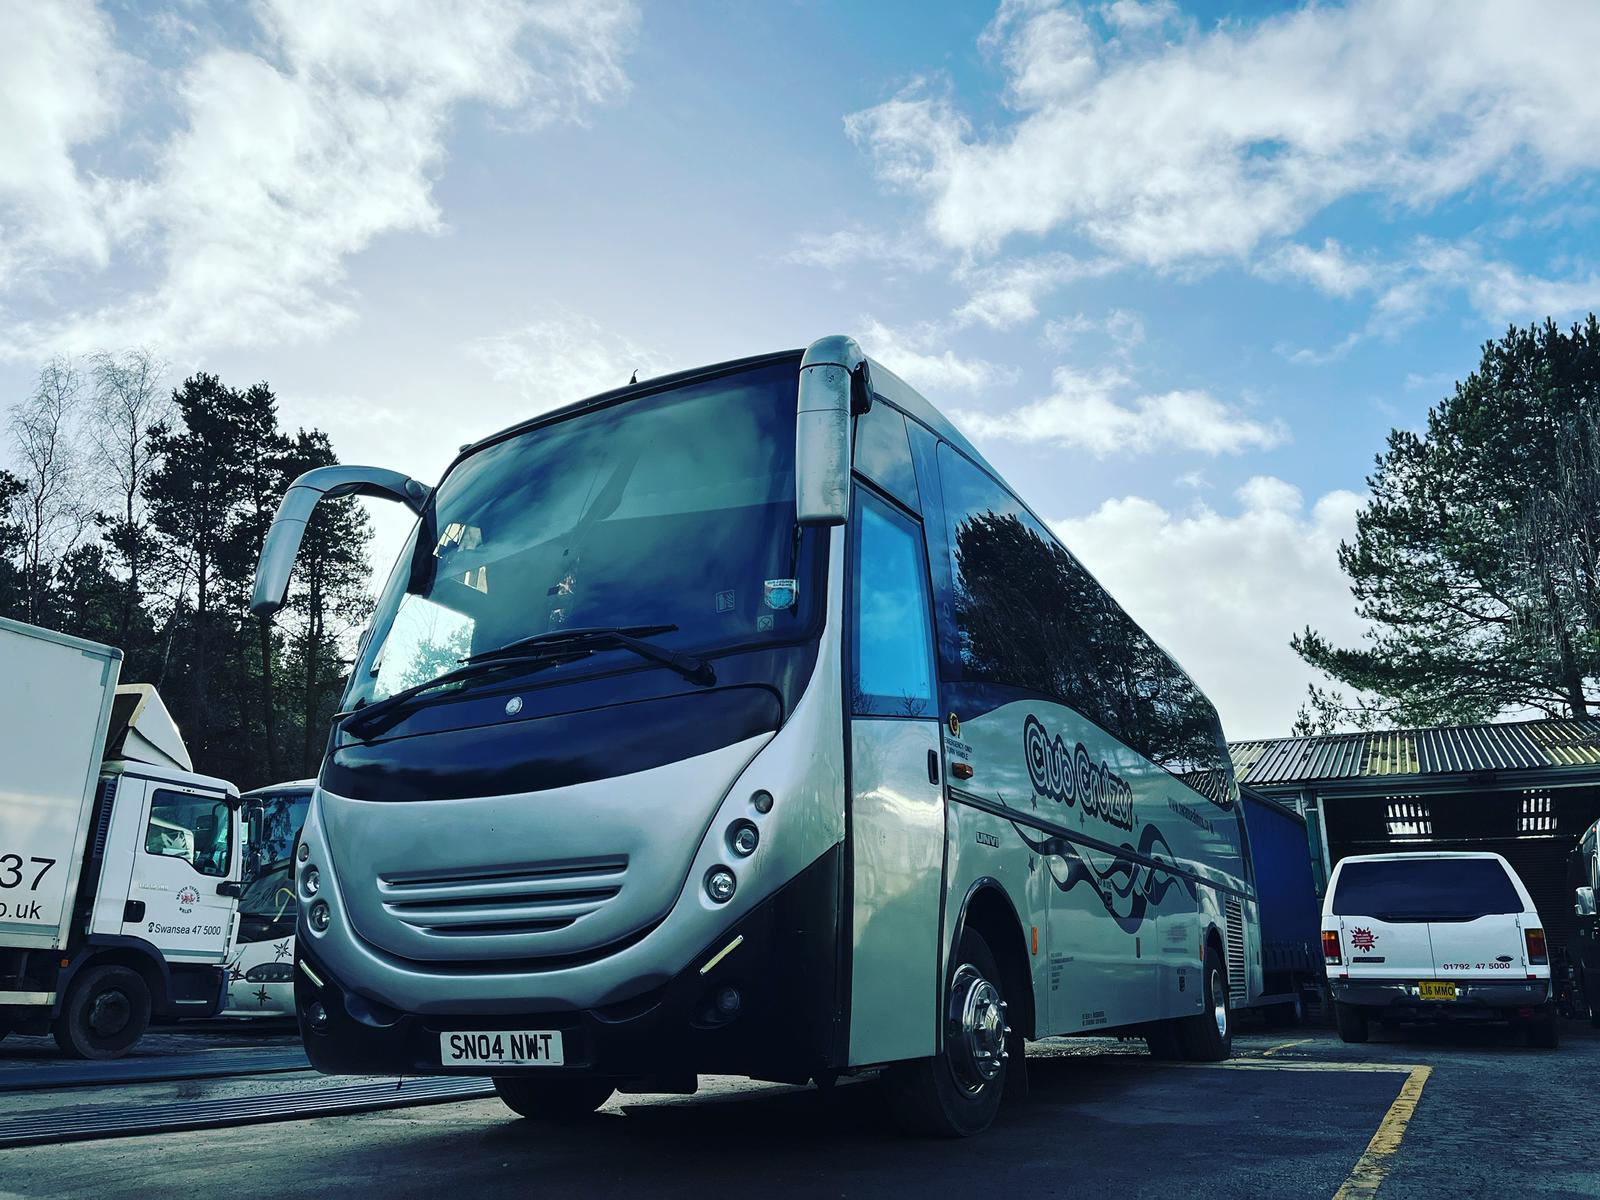 Arriving in Style: Finding Your Dream Prom Coach in Merthyr Tydfil